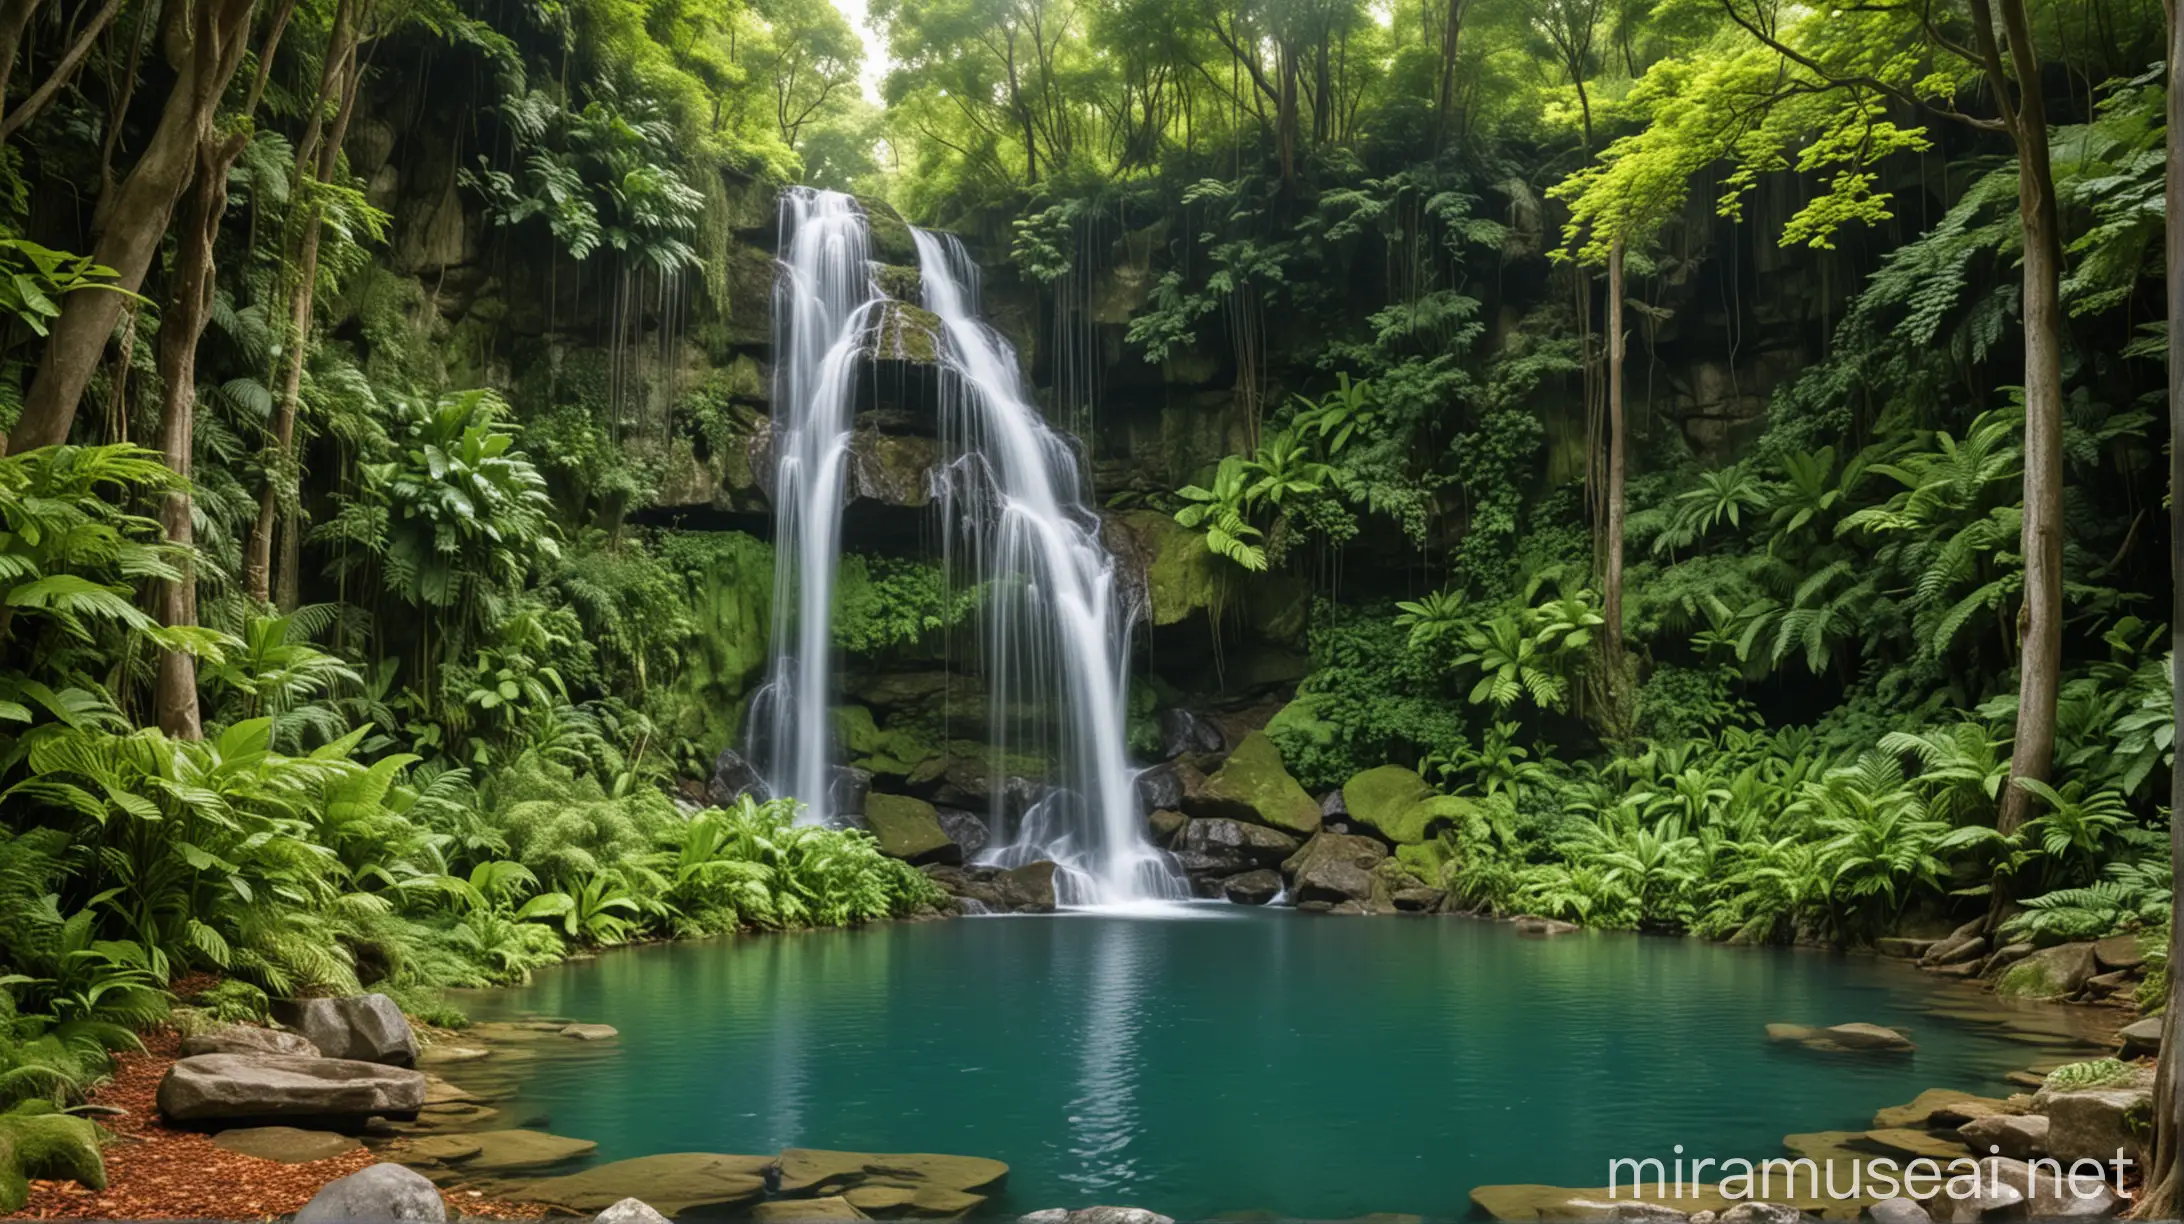 Tranquil Forest Waterfall Serene Scene of Cascading Water in Lush Greenery